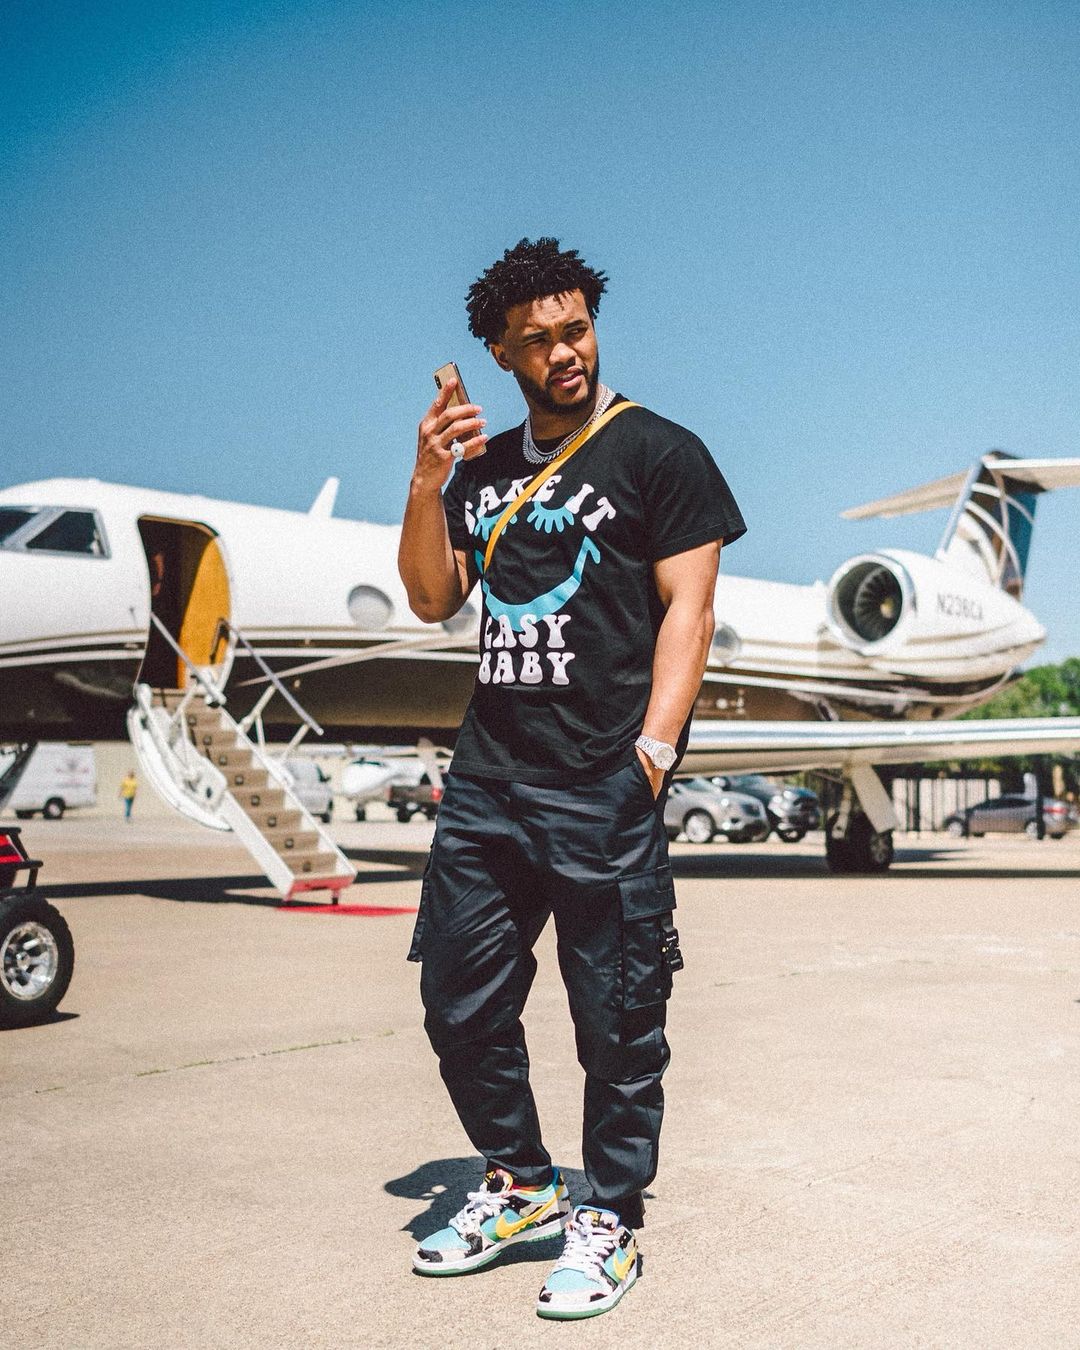 Kyler Murray is one of the most stylish NFL players